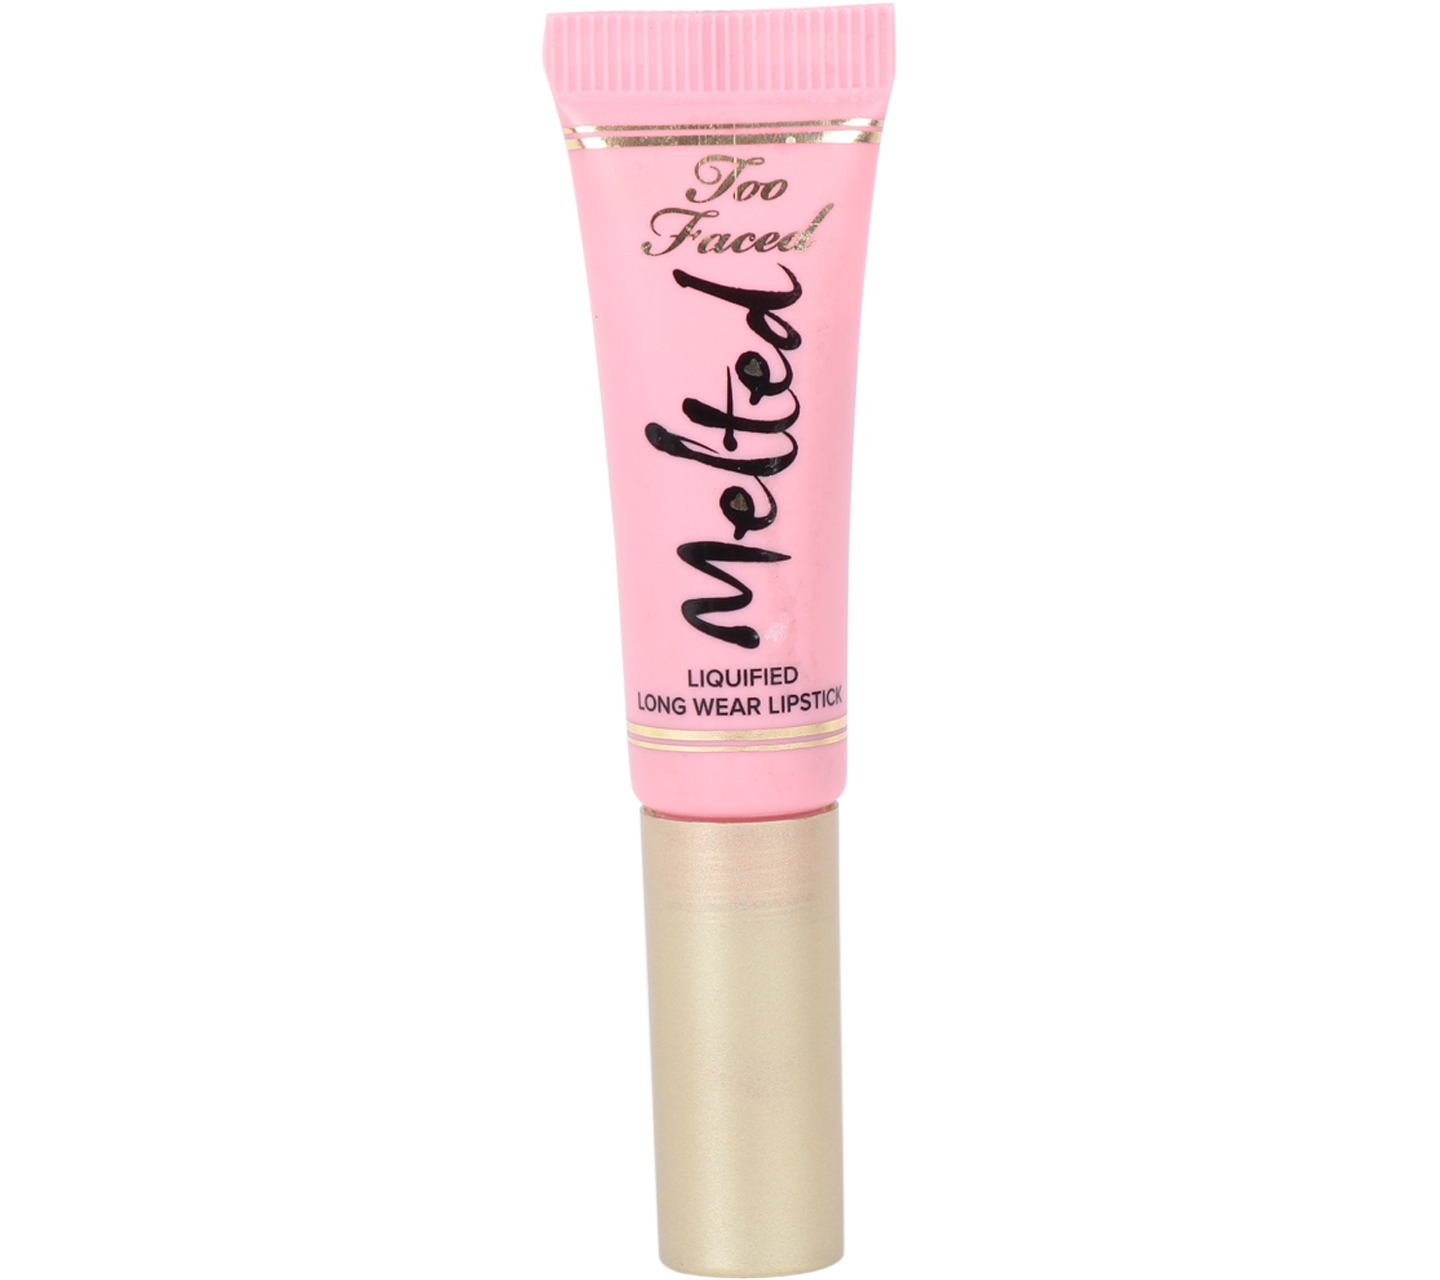 Too Faced Melted Peony Liquified Long Wear Lipstick Lips